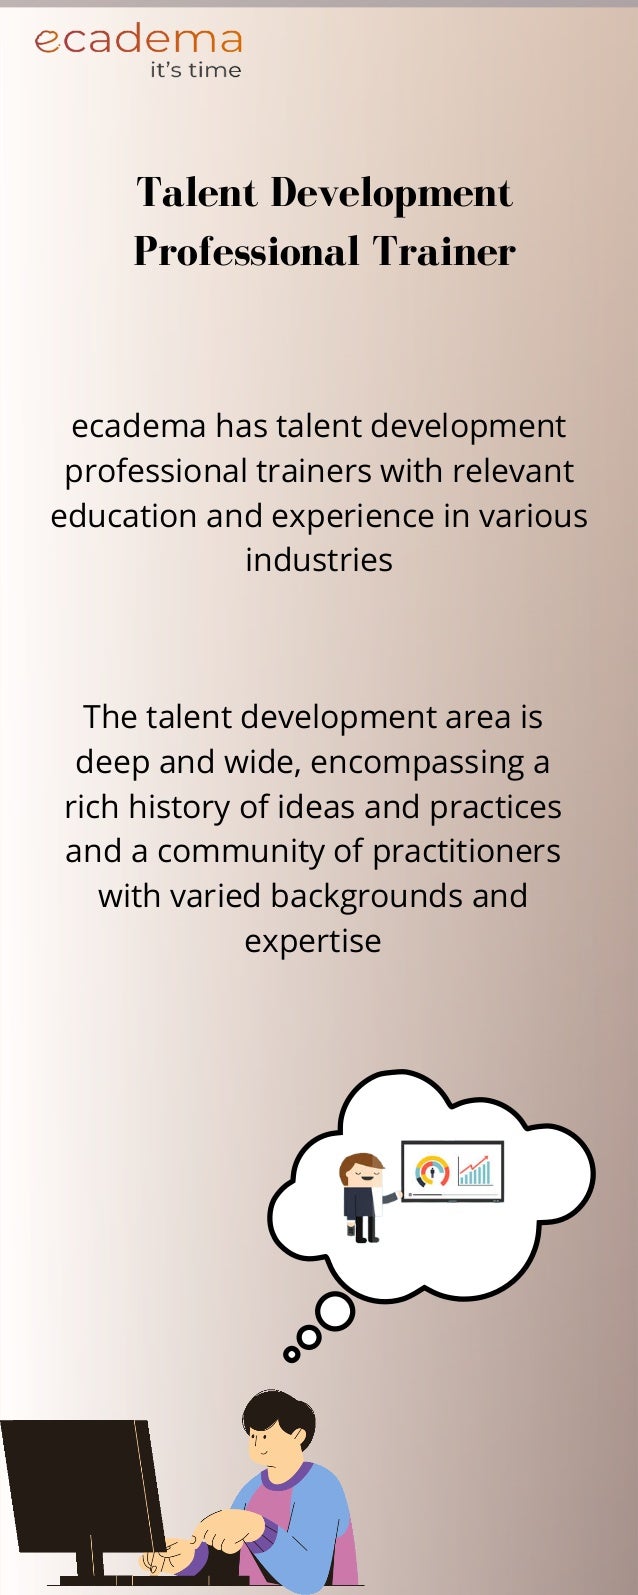 The talent development area is
deep and wide, encompassing a
rich history of ideas and practices
and a community of practitioners
with varied backgrounds and
expertise
Talent Development
Professional Trainer
ecadema has talent development
professional trainers with relevant
education and experience in various
industries
 